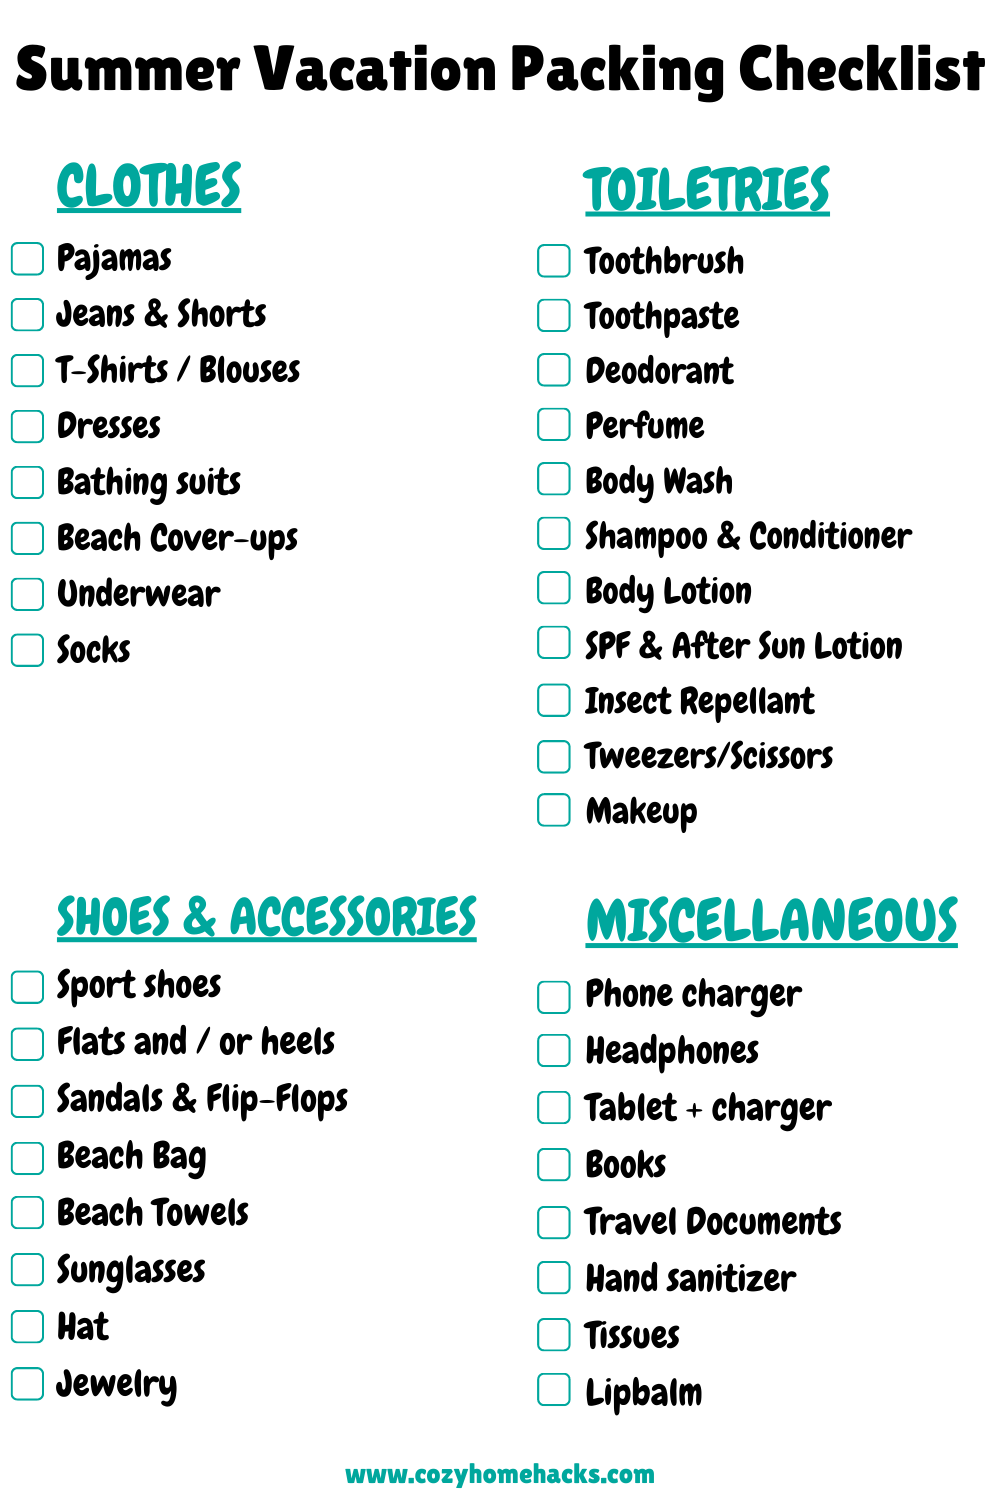 how to pack for summer vacation - the packing checklist